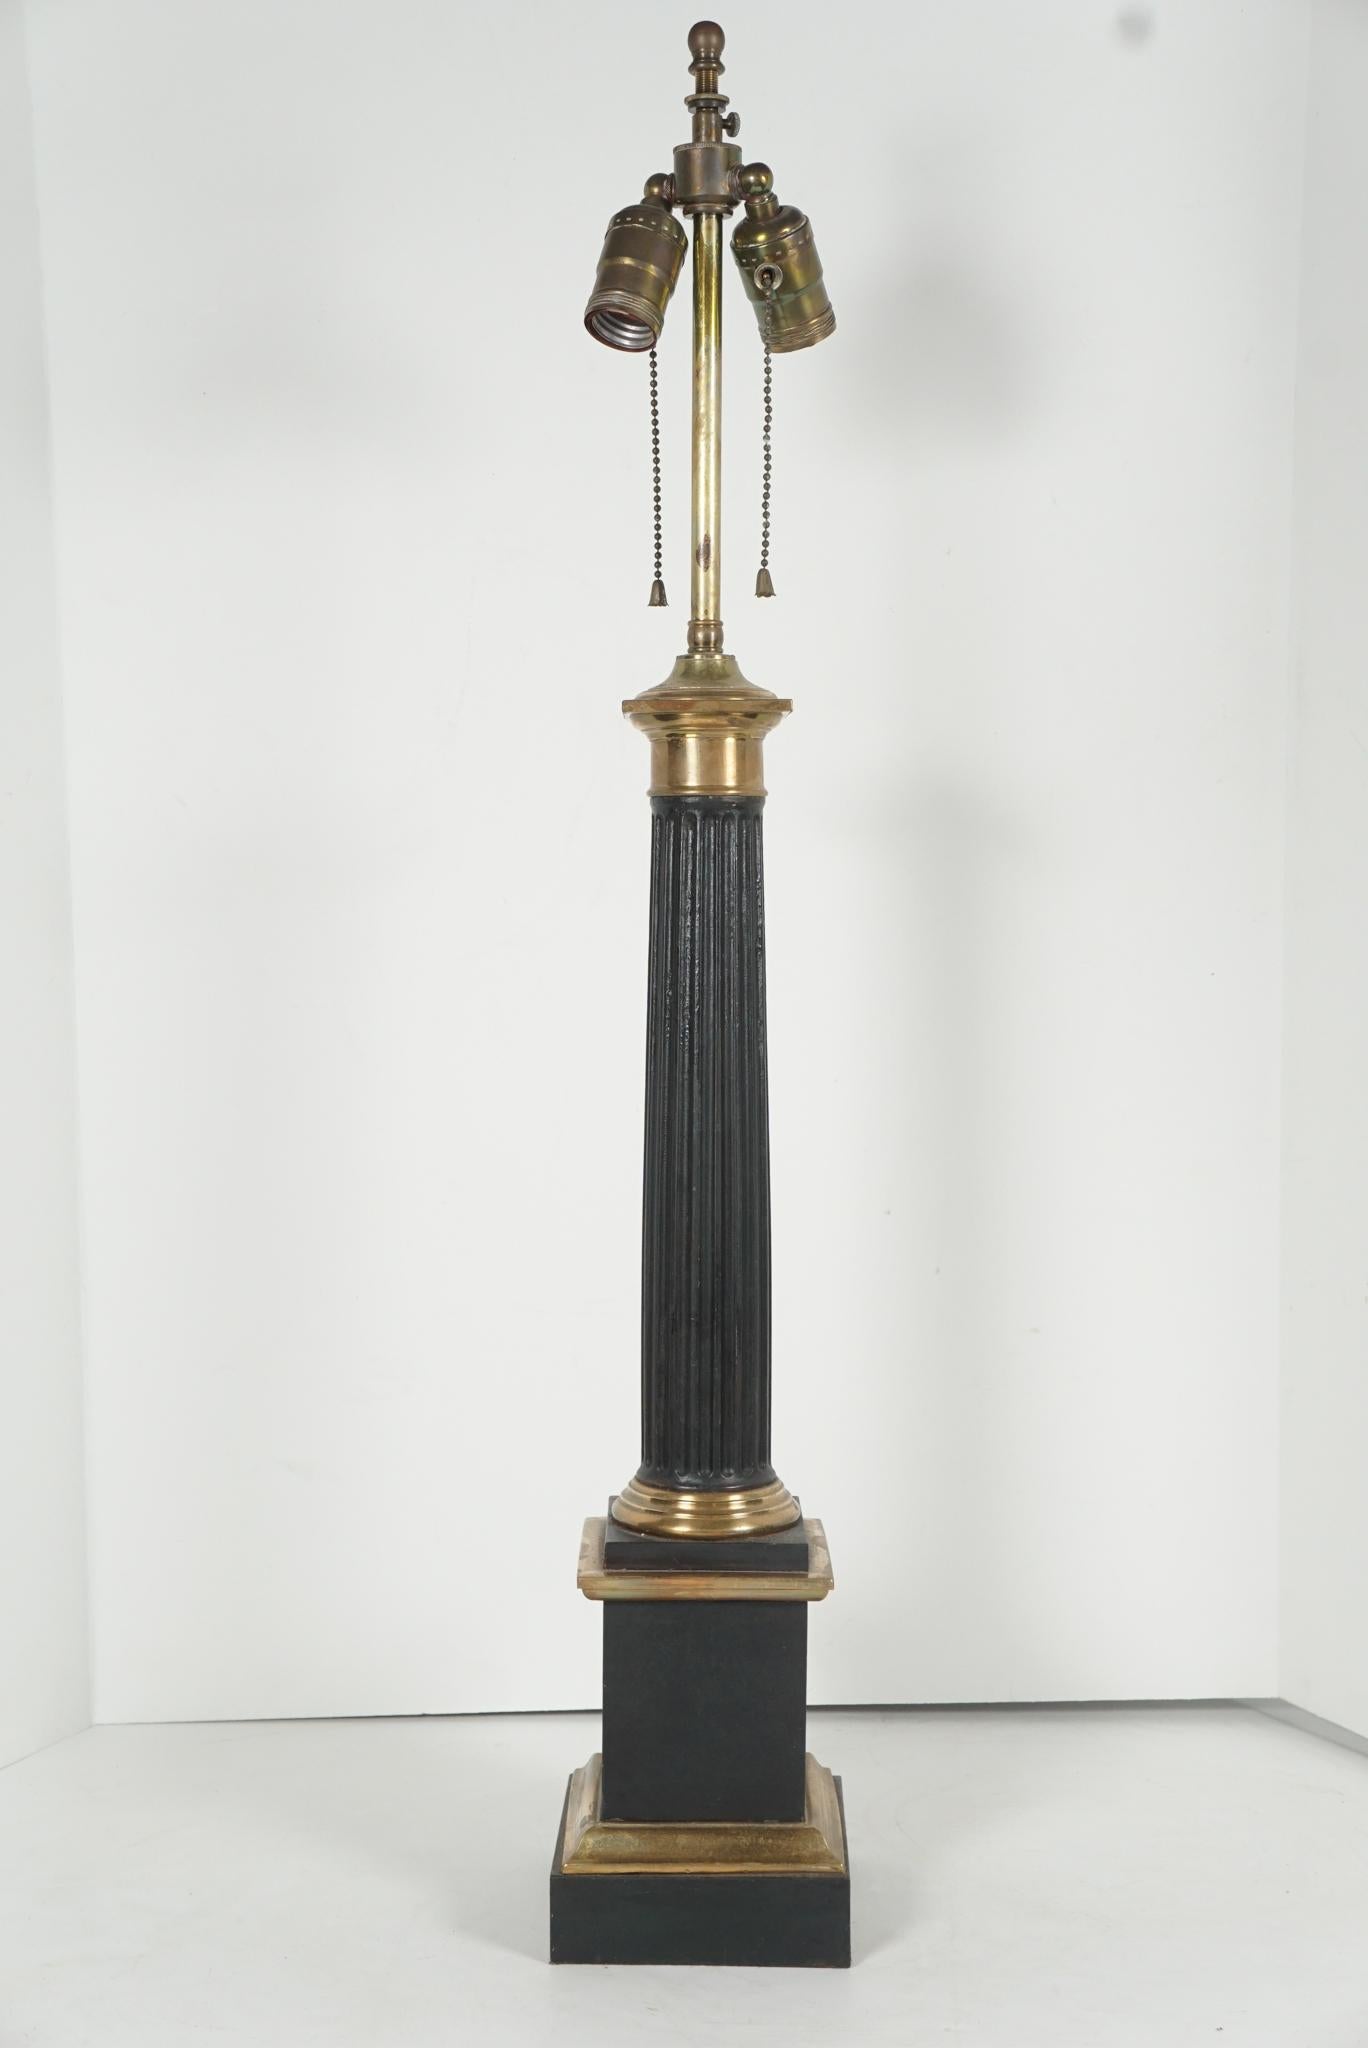 This fine classical carcel lamp would originally have had a burner and glass shade but now is fitted for electricity and will require a tole or cloth shade. 
Designed as a classical fluted column resting on a block base and plinth the lamp is made